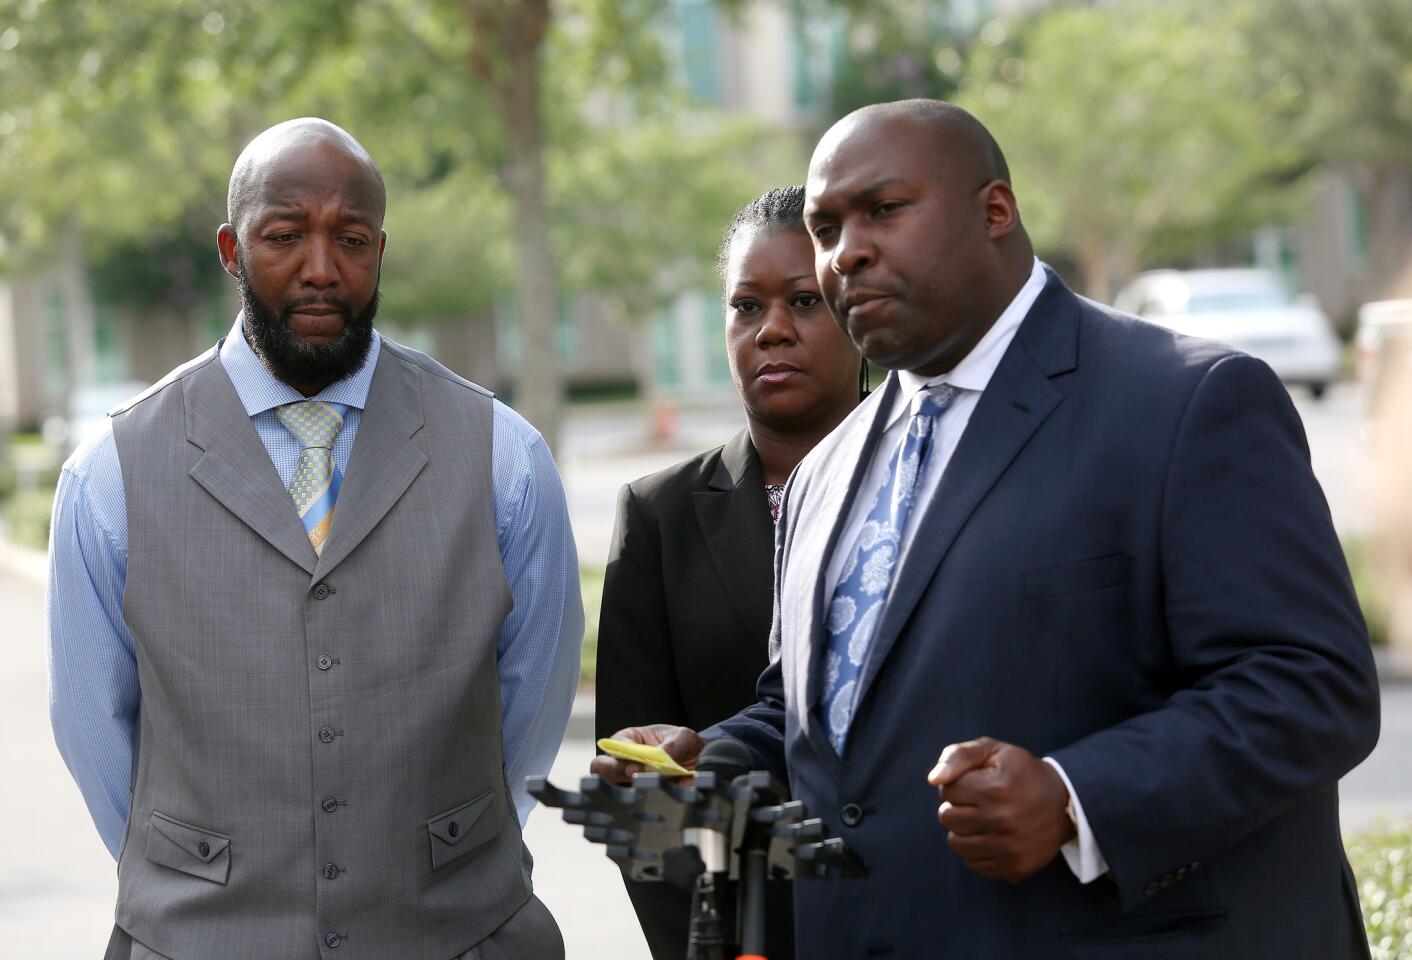 Family attorney Daryl Parks gives a press conference with Tracy Martin and Sybrina Fulton after the day's proceedings of George Zimmerman's trial in Seminole circuit court in Sanford, Fla. Thursday, June 27, 2013. Zimmerman has been charged with second-degree murder for the 2012 shooting death of Trayvon Martin. (Jacob Langston/Orlando Sentinel)